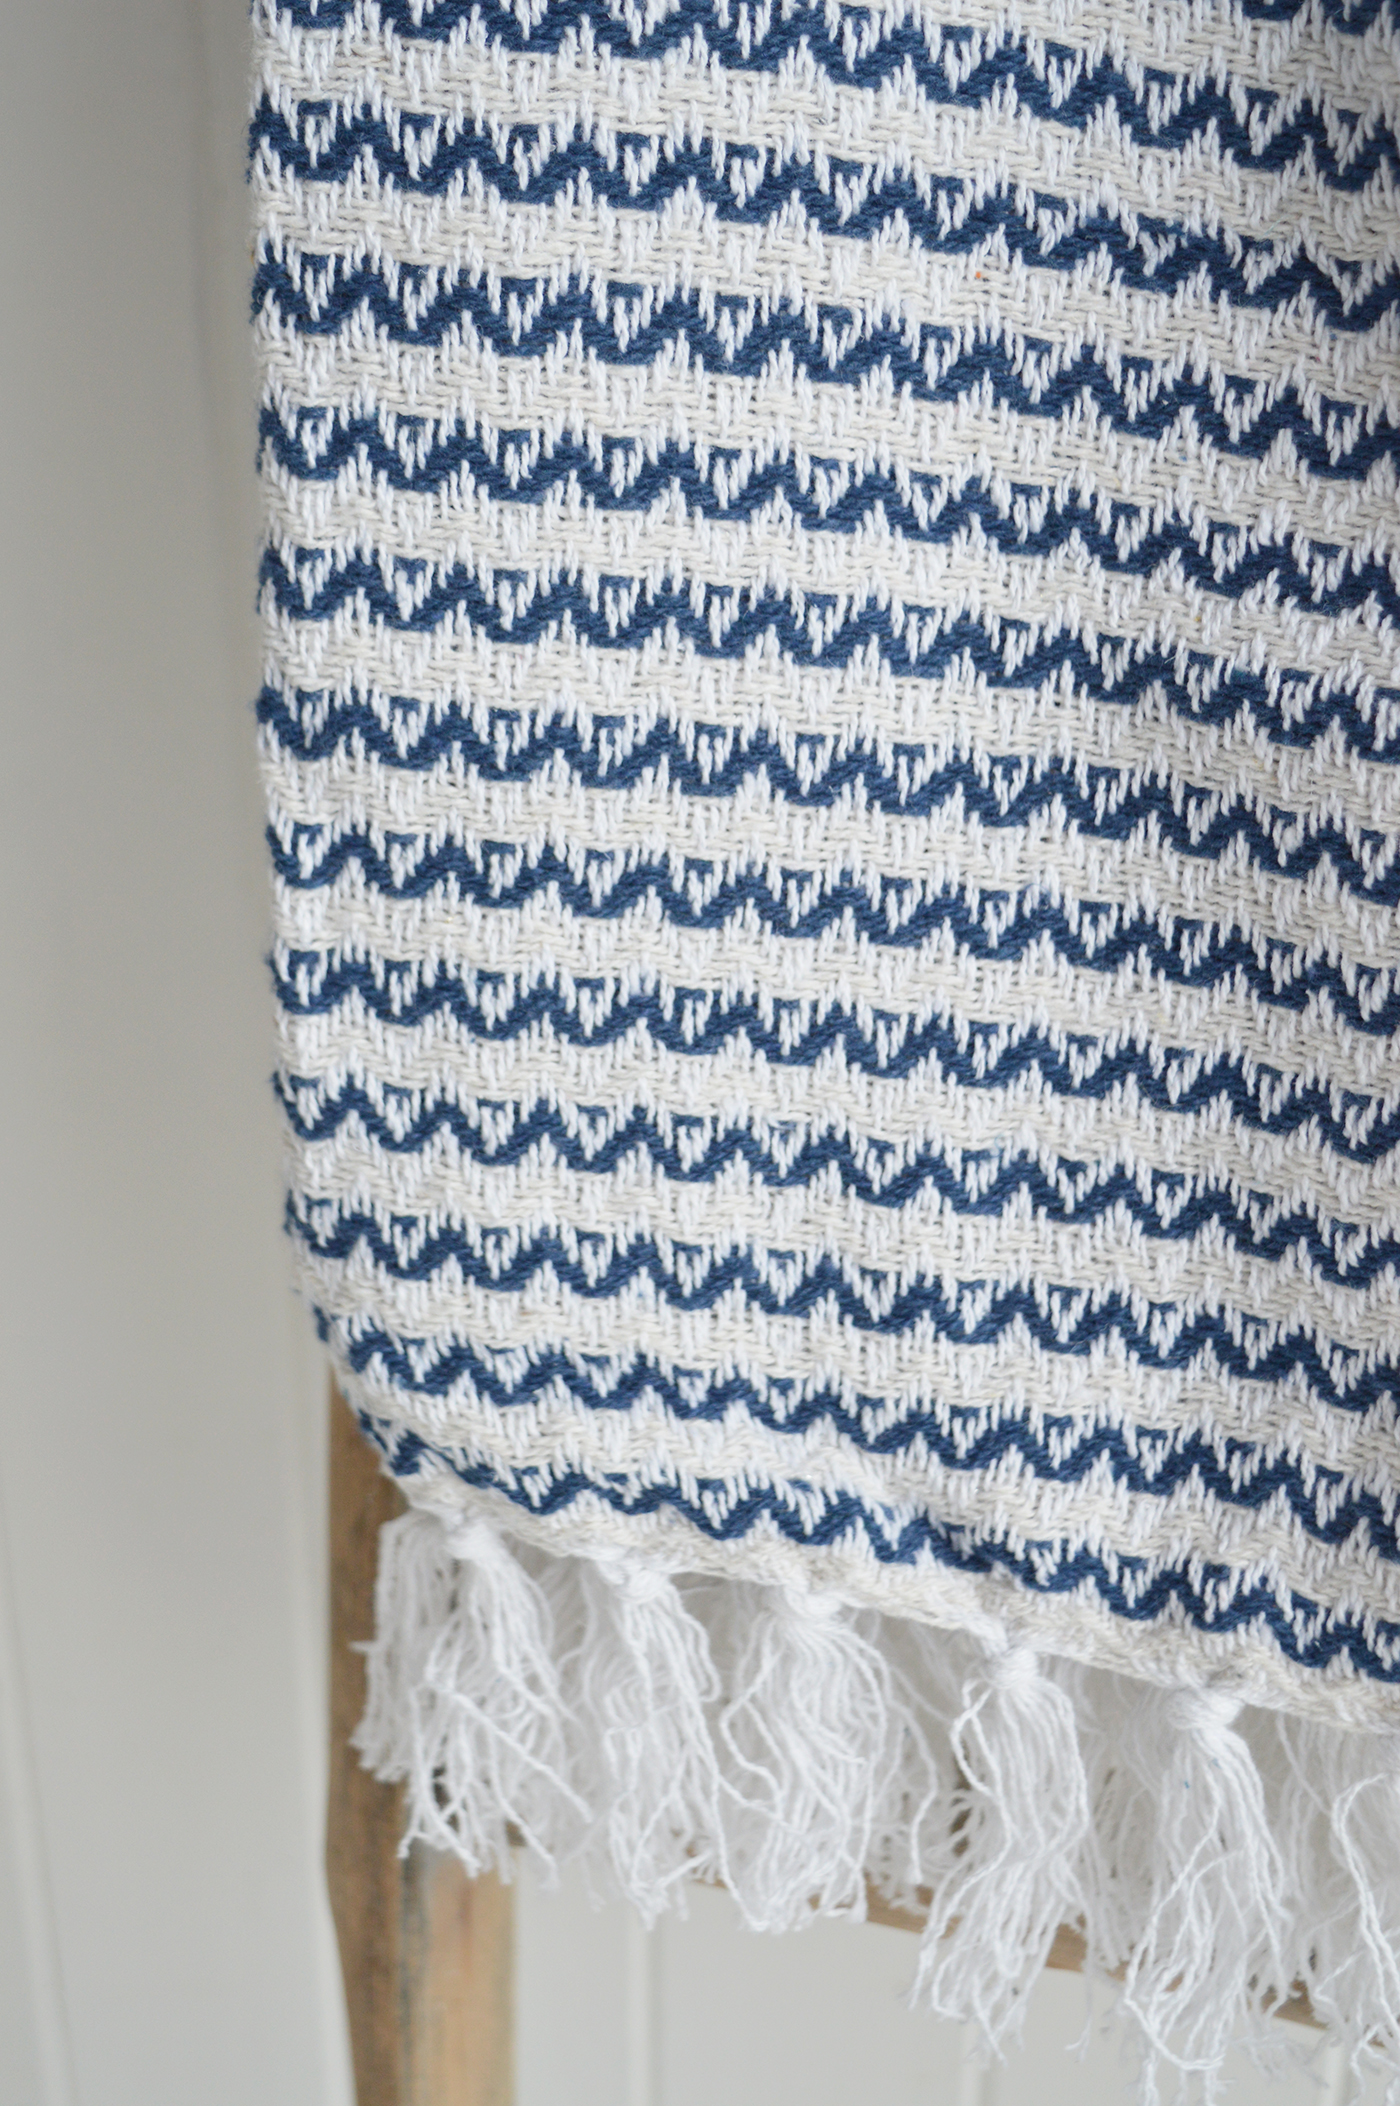 Hadley bluen and white Throw Blanket - New England, modern coastal and farmhouse style furniture and interiors